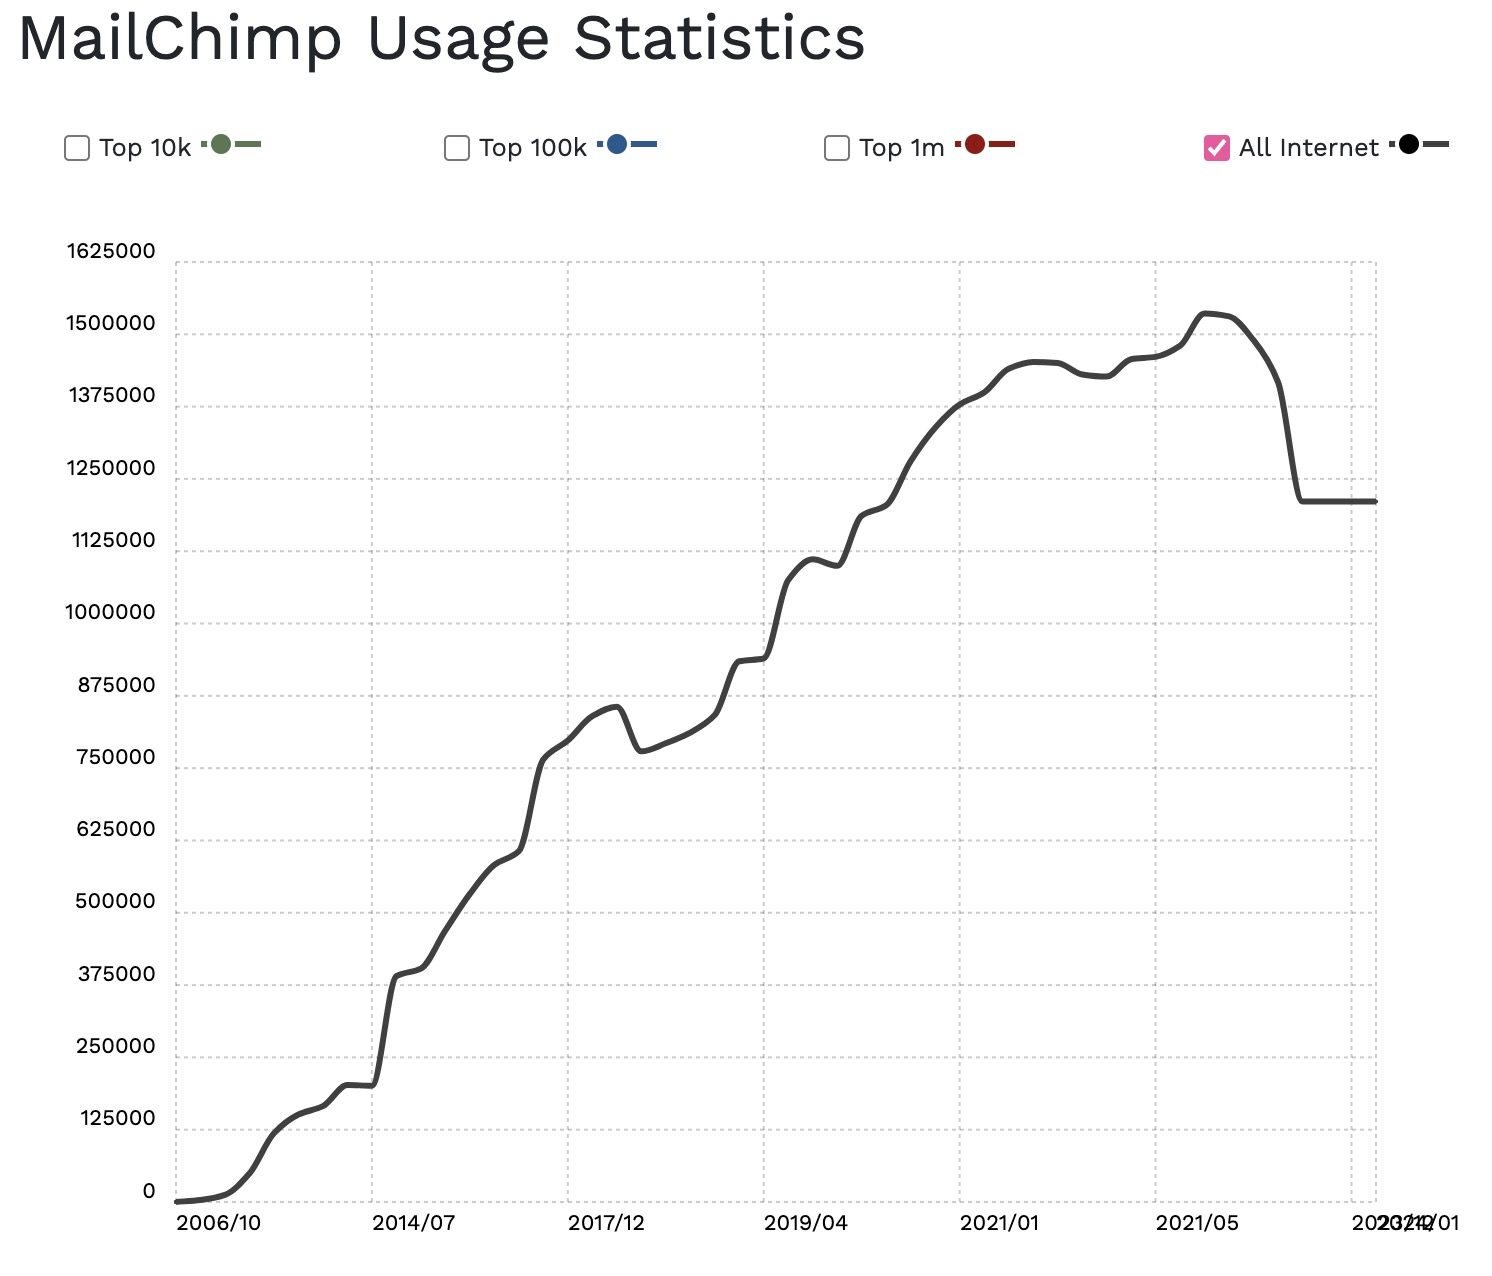 A line graph showing Mailchimp usage has gone up over the years but dipped around 2021